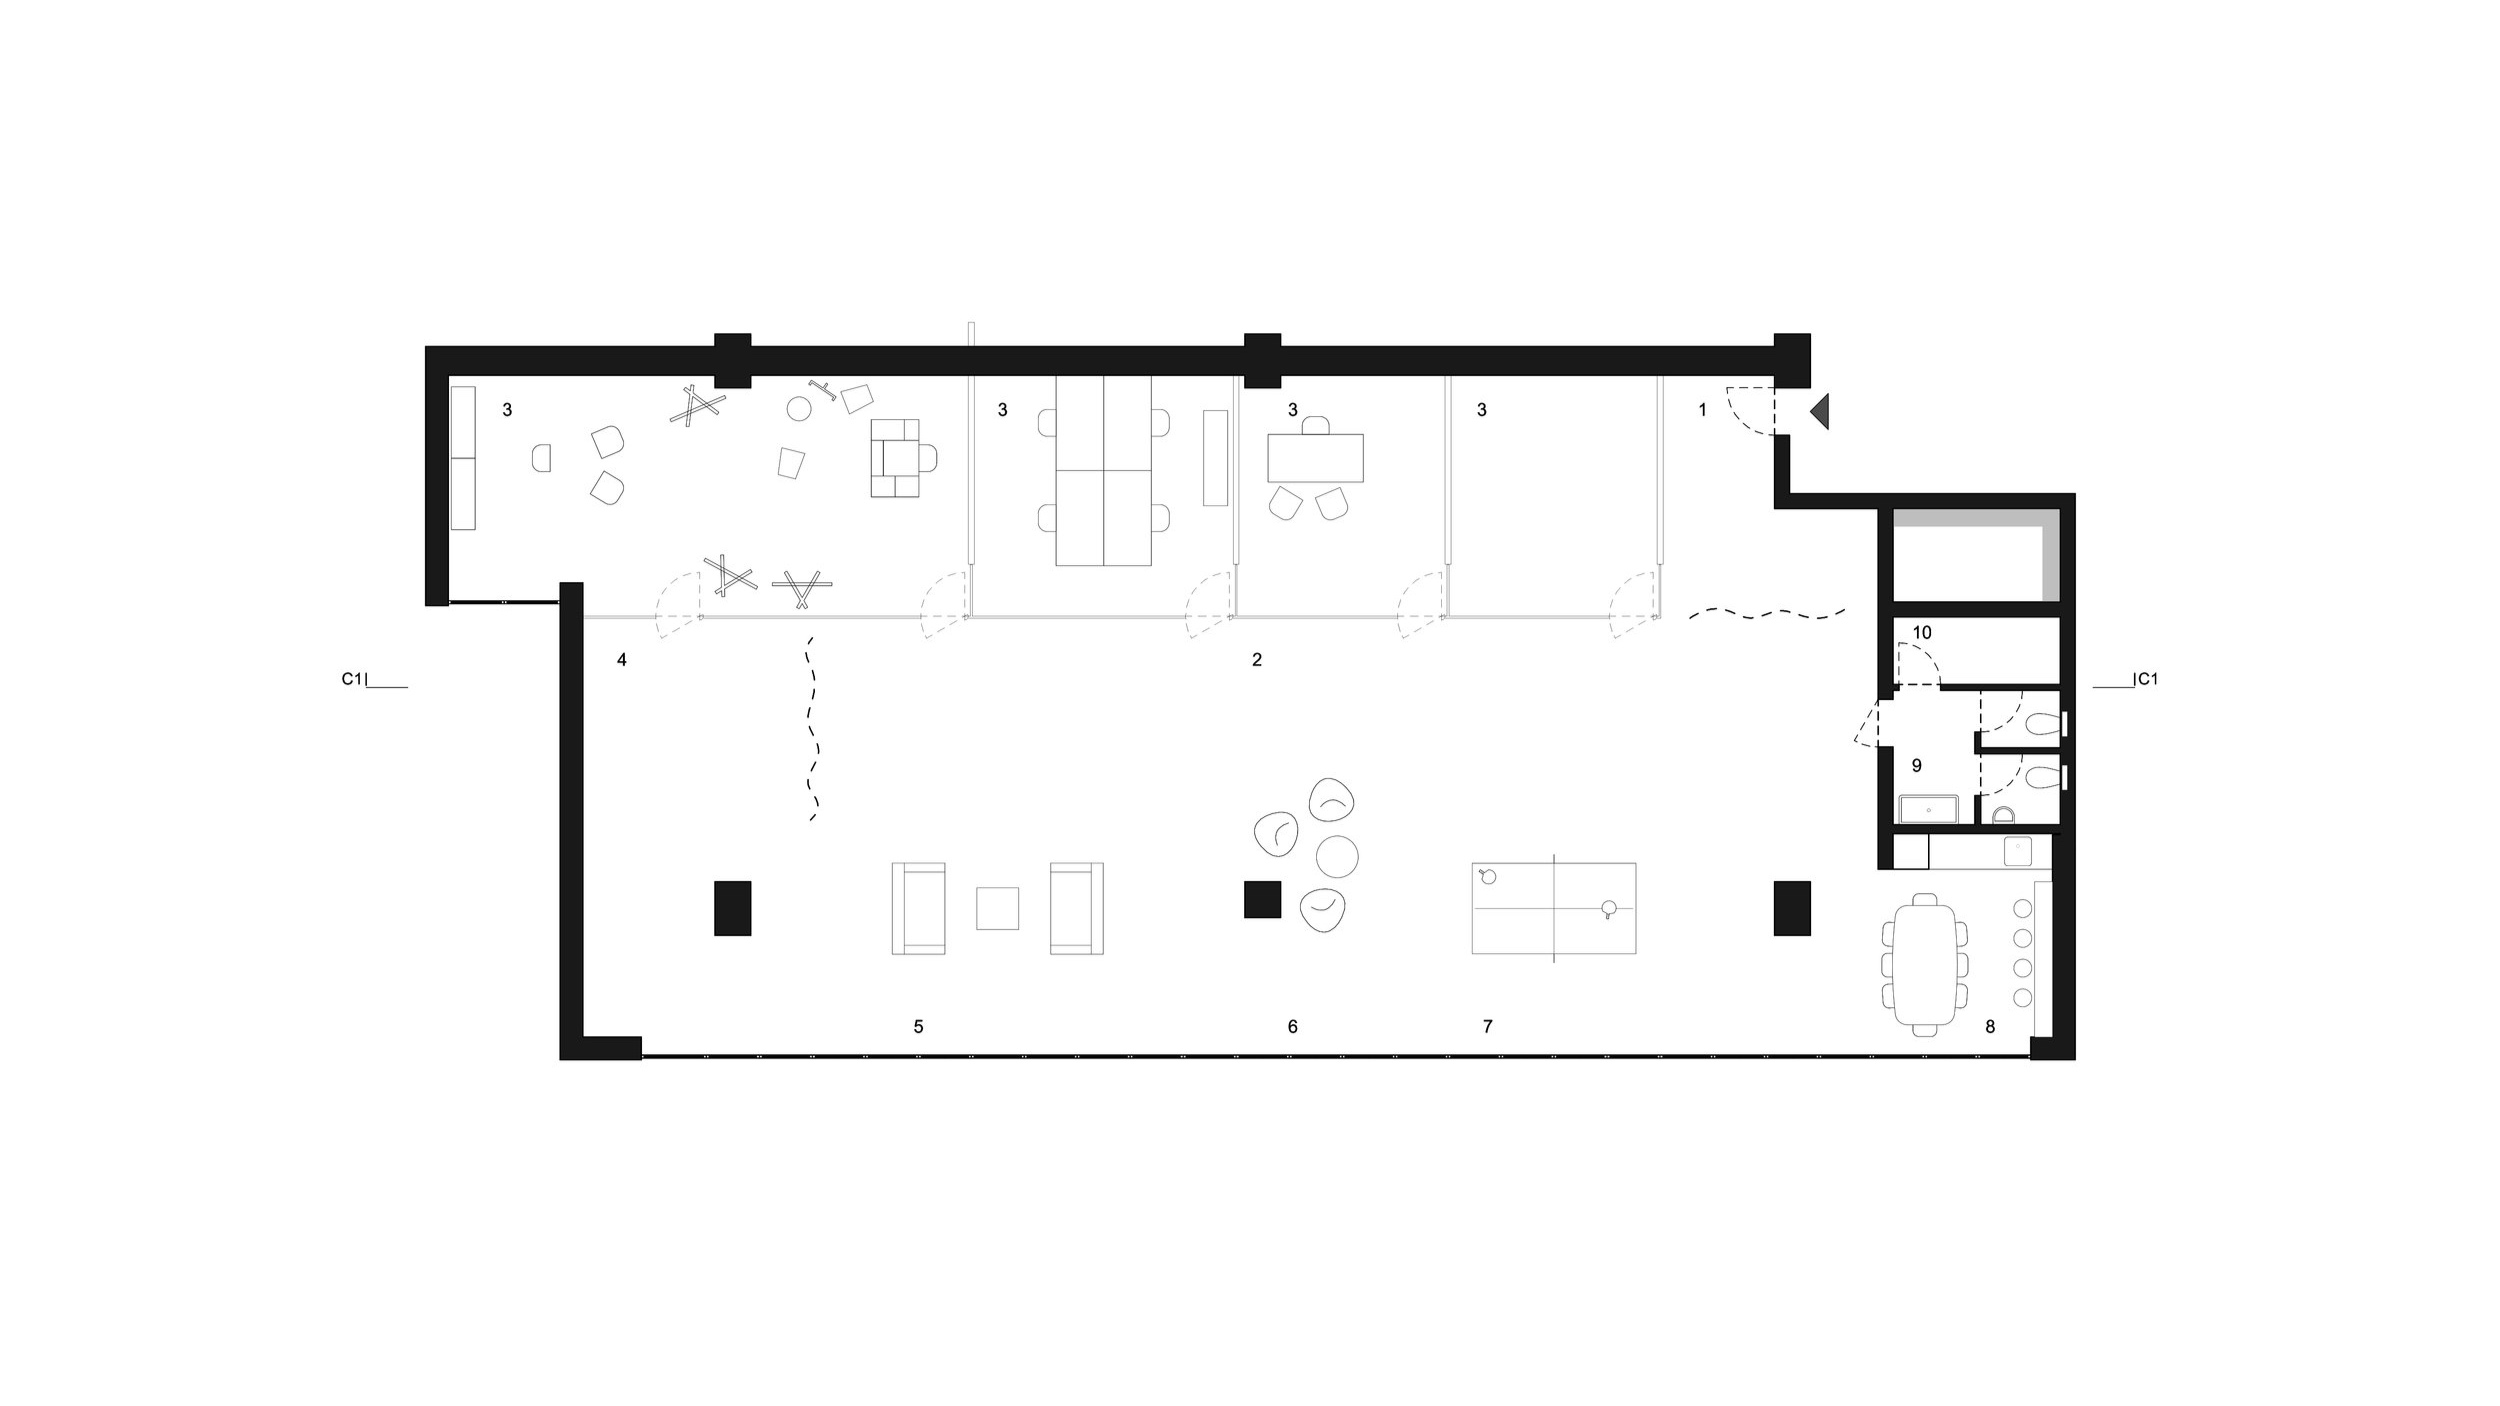 FLOOR PLAN _ 1 entrance hall . 2 circulation . 3 office . 4 photo shooting area . 5 lounge . 6 meeting corner . 7 playing area . 8 pantry . 9 toilets . 10 storage